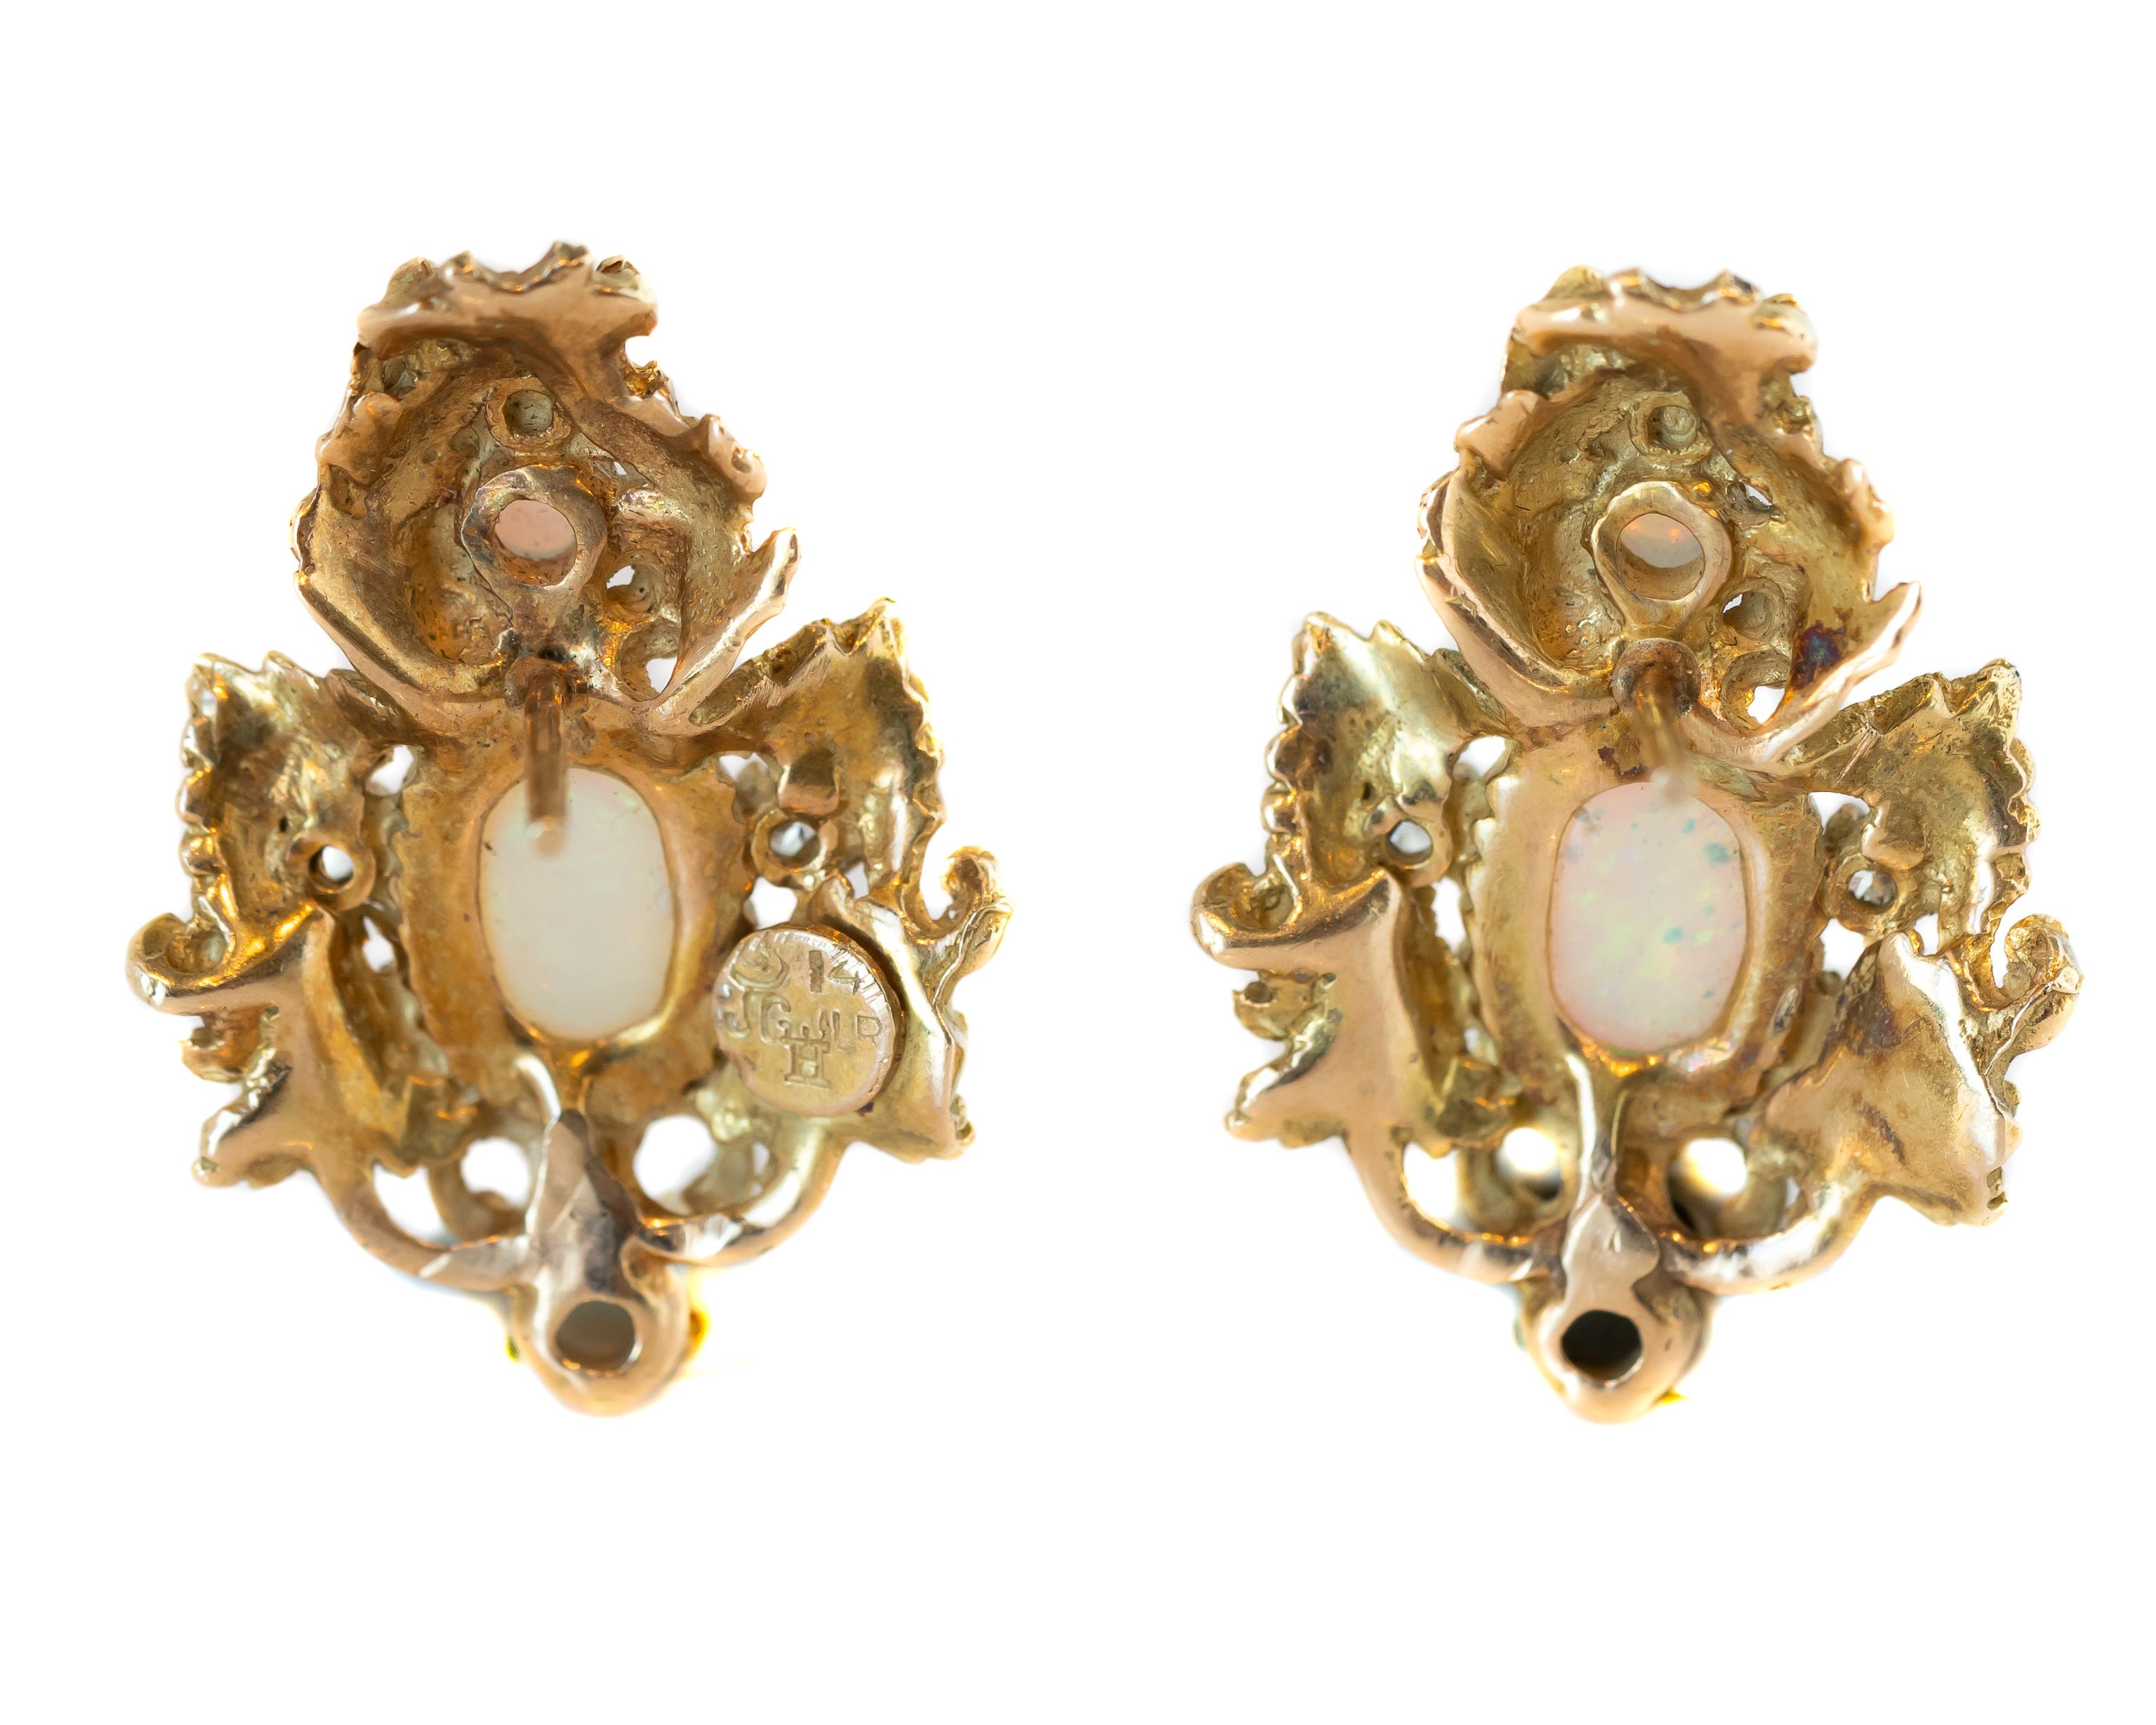 Baroque-Inspired Gold, Opal and Diamond Earrings crafted in 14 karat Yellow Gold, Opals and Diamonds

Baroque-Inspired Feather/Floral Design Gold studs with 2 Oval Opals, 4 Round Opals and 8 Round Brilliant Diamonds
Opals have fiery Pink, Blue and